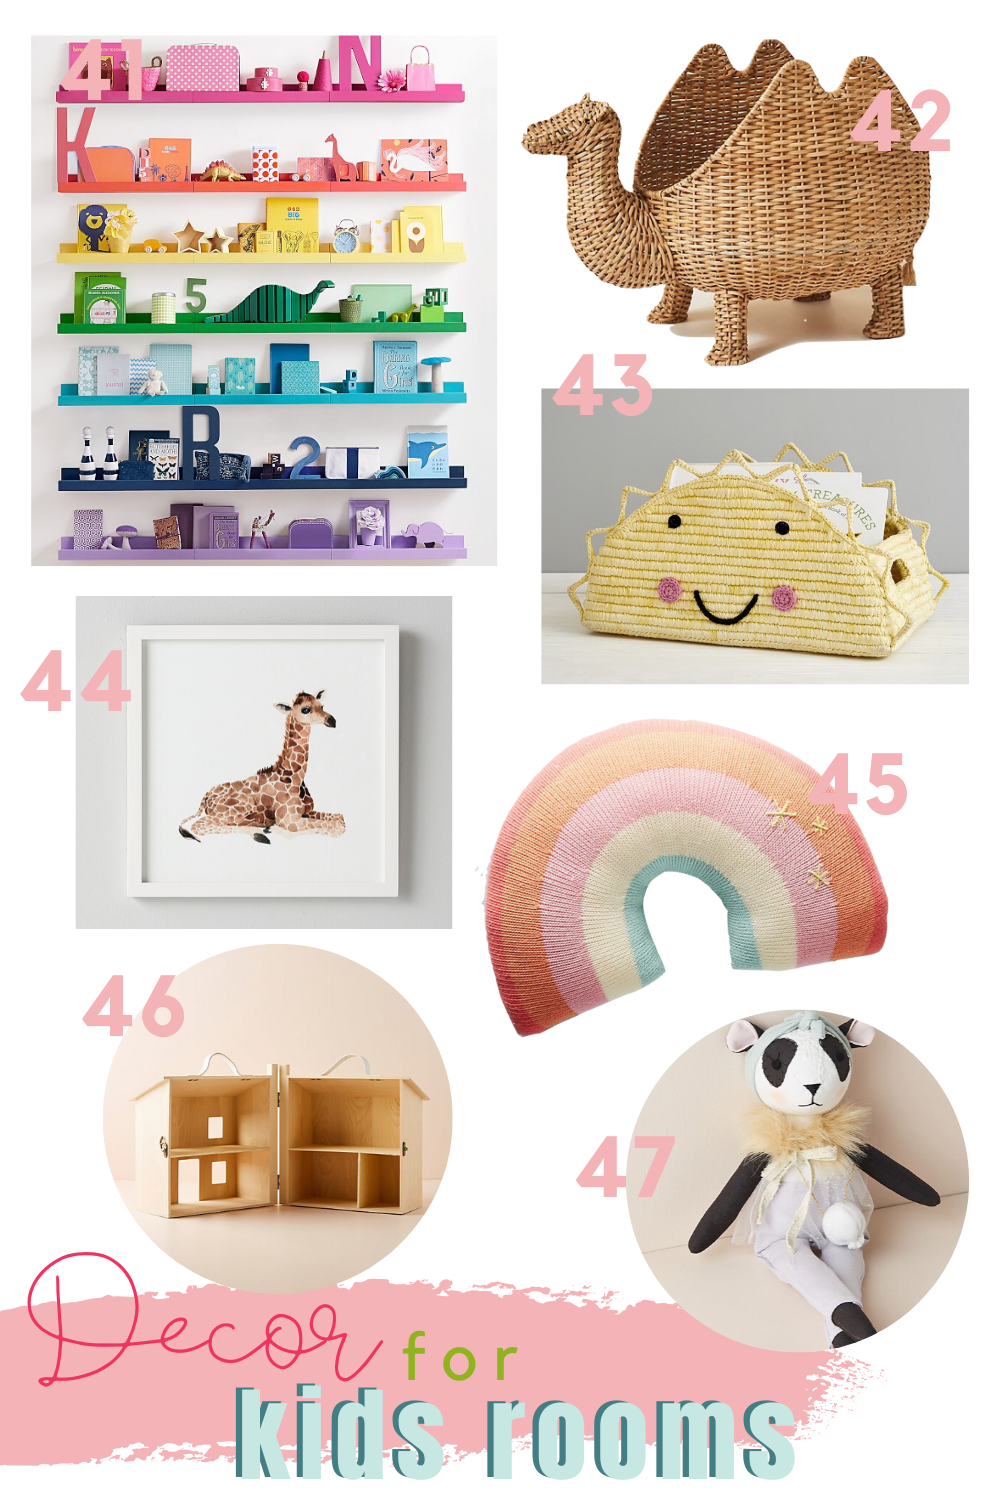 Great Finds for Kids Rooms